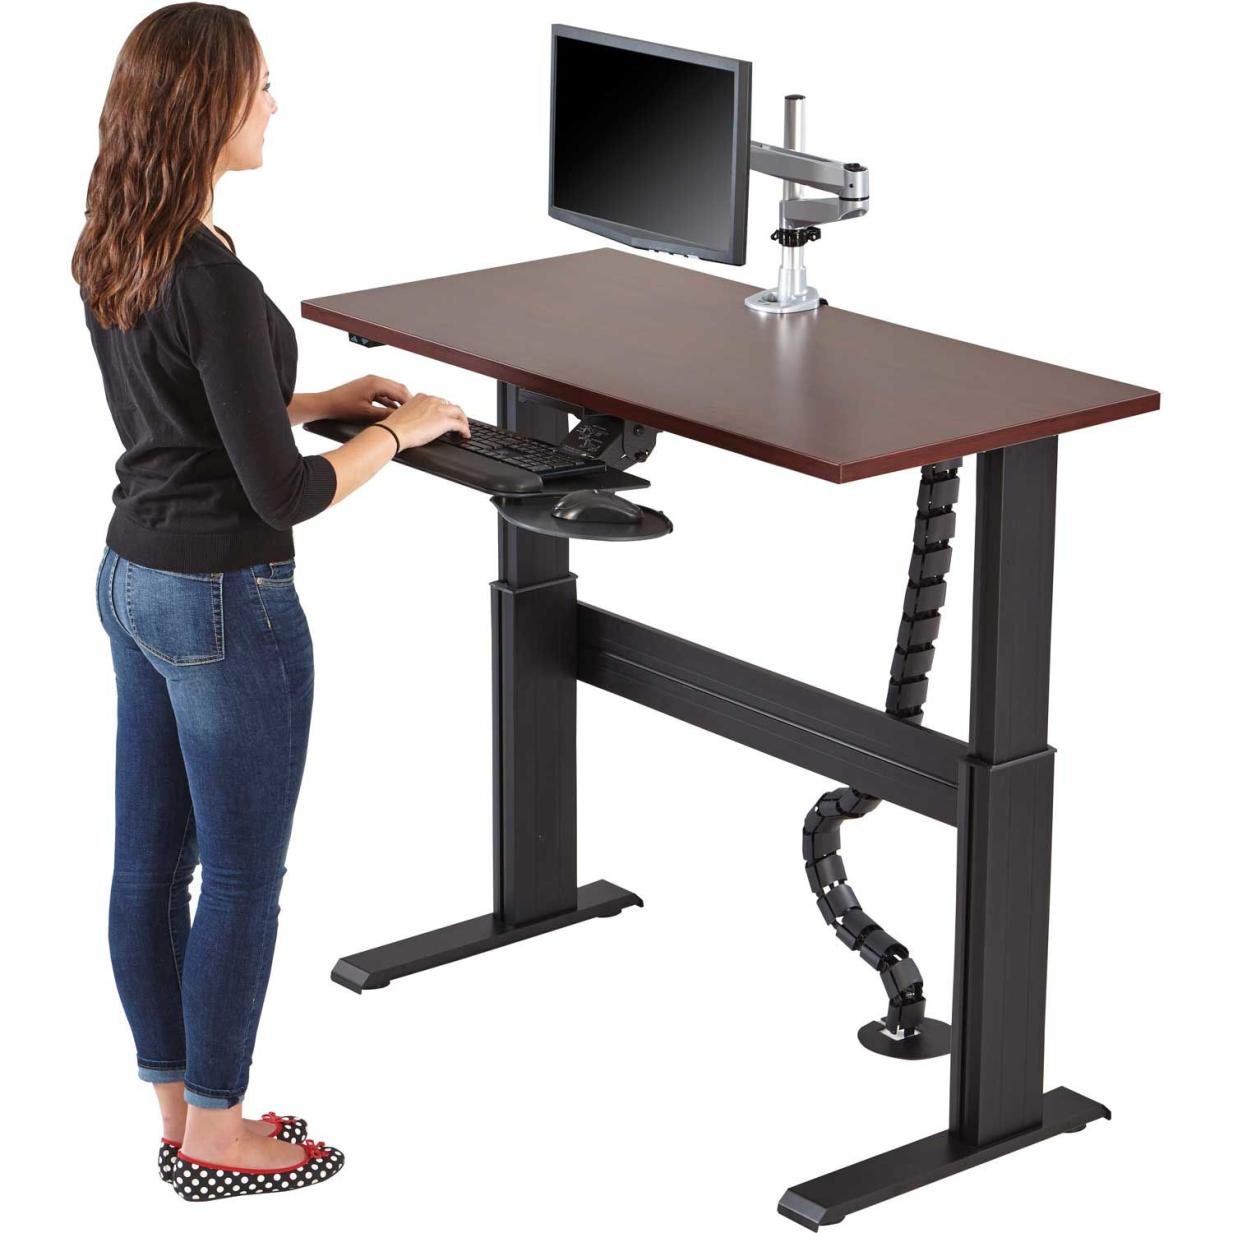 What are the Best Electric Height Adjustable Desks for Teachers with Special Needs?